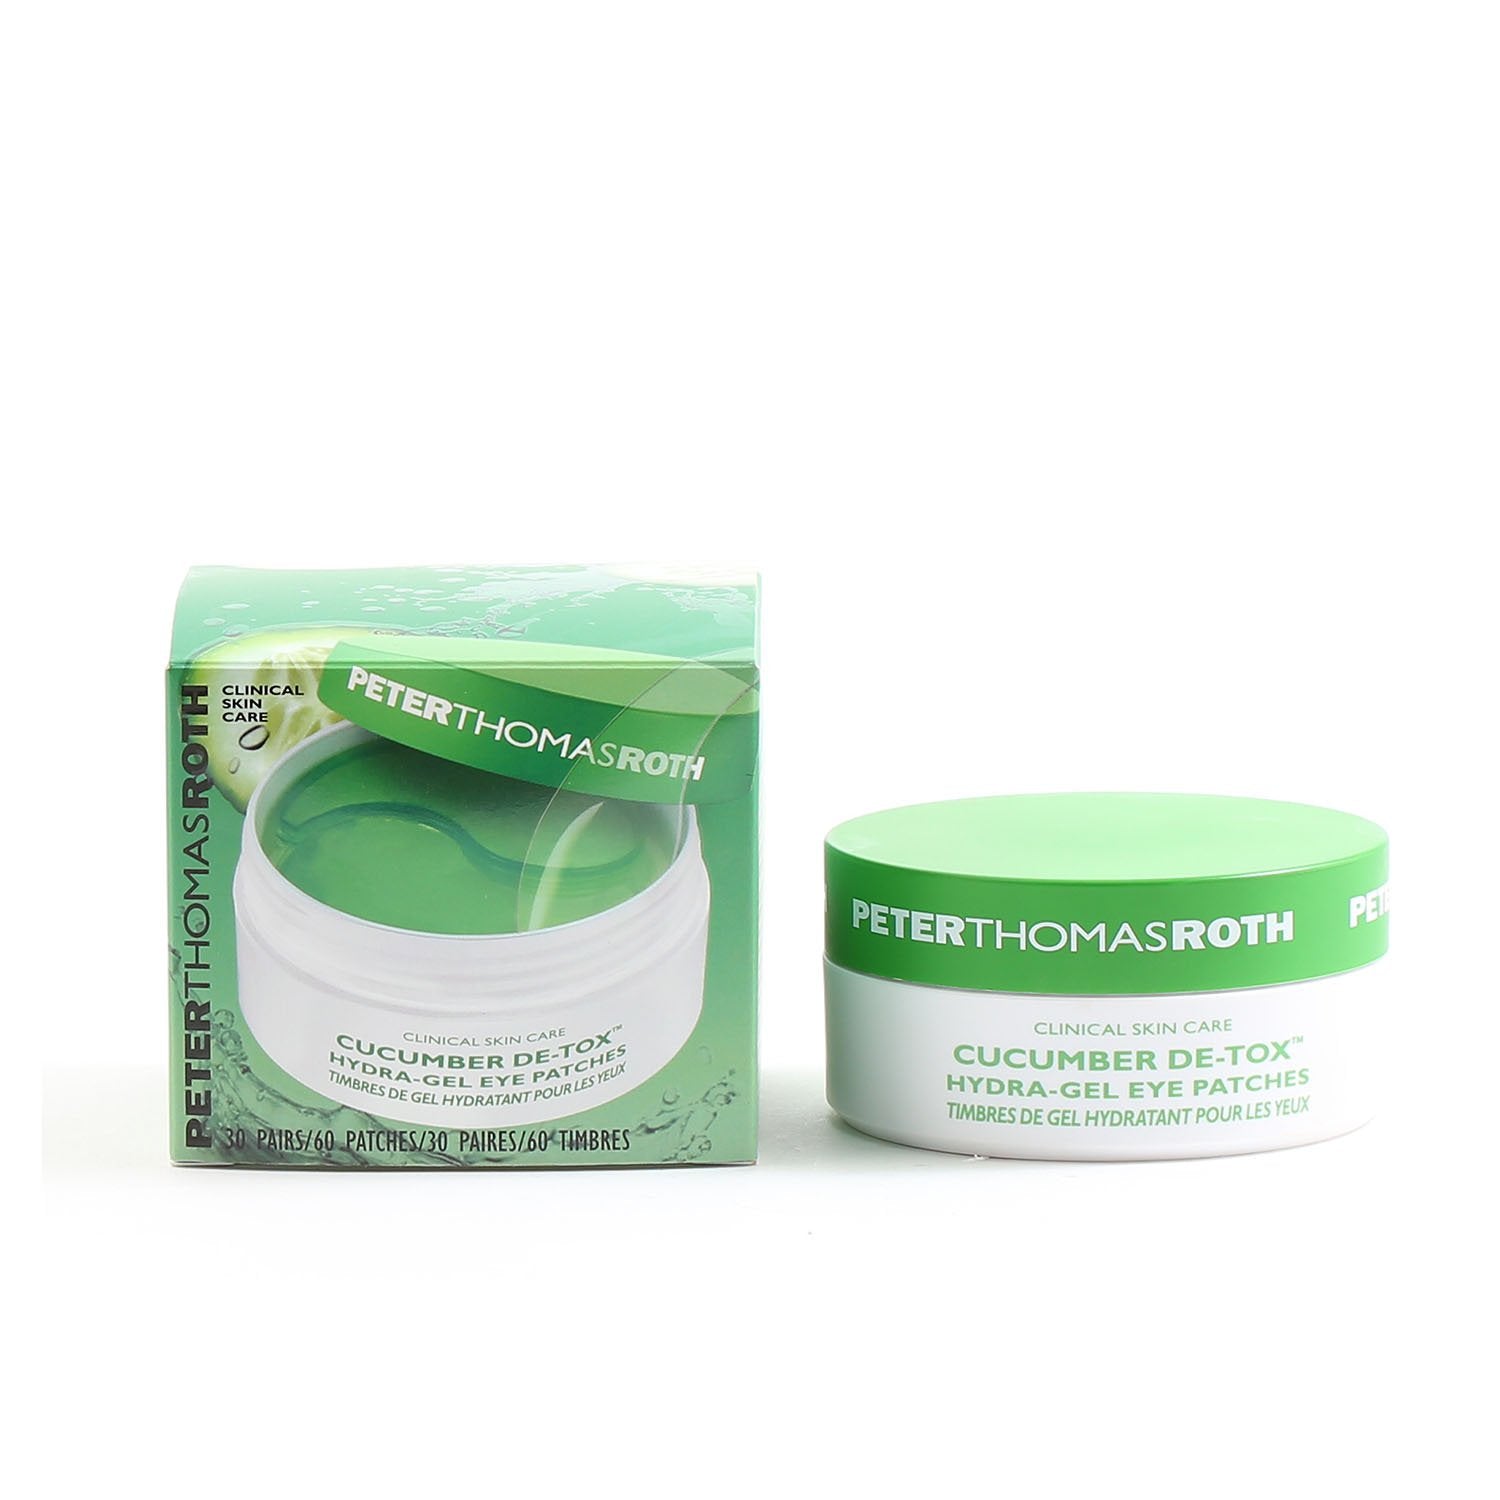 Skin Care - PETER THOMAS ROTH CUCUMBER DE-TOX HYDRA-GEL EYE PATCHES - 60 CT